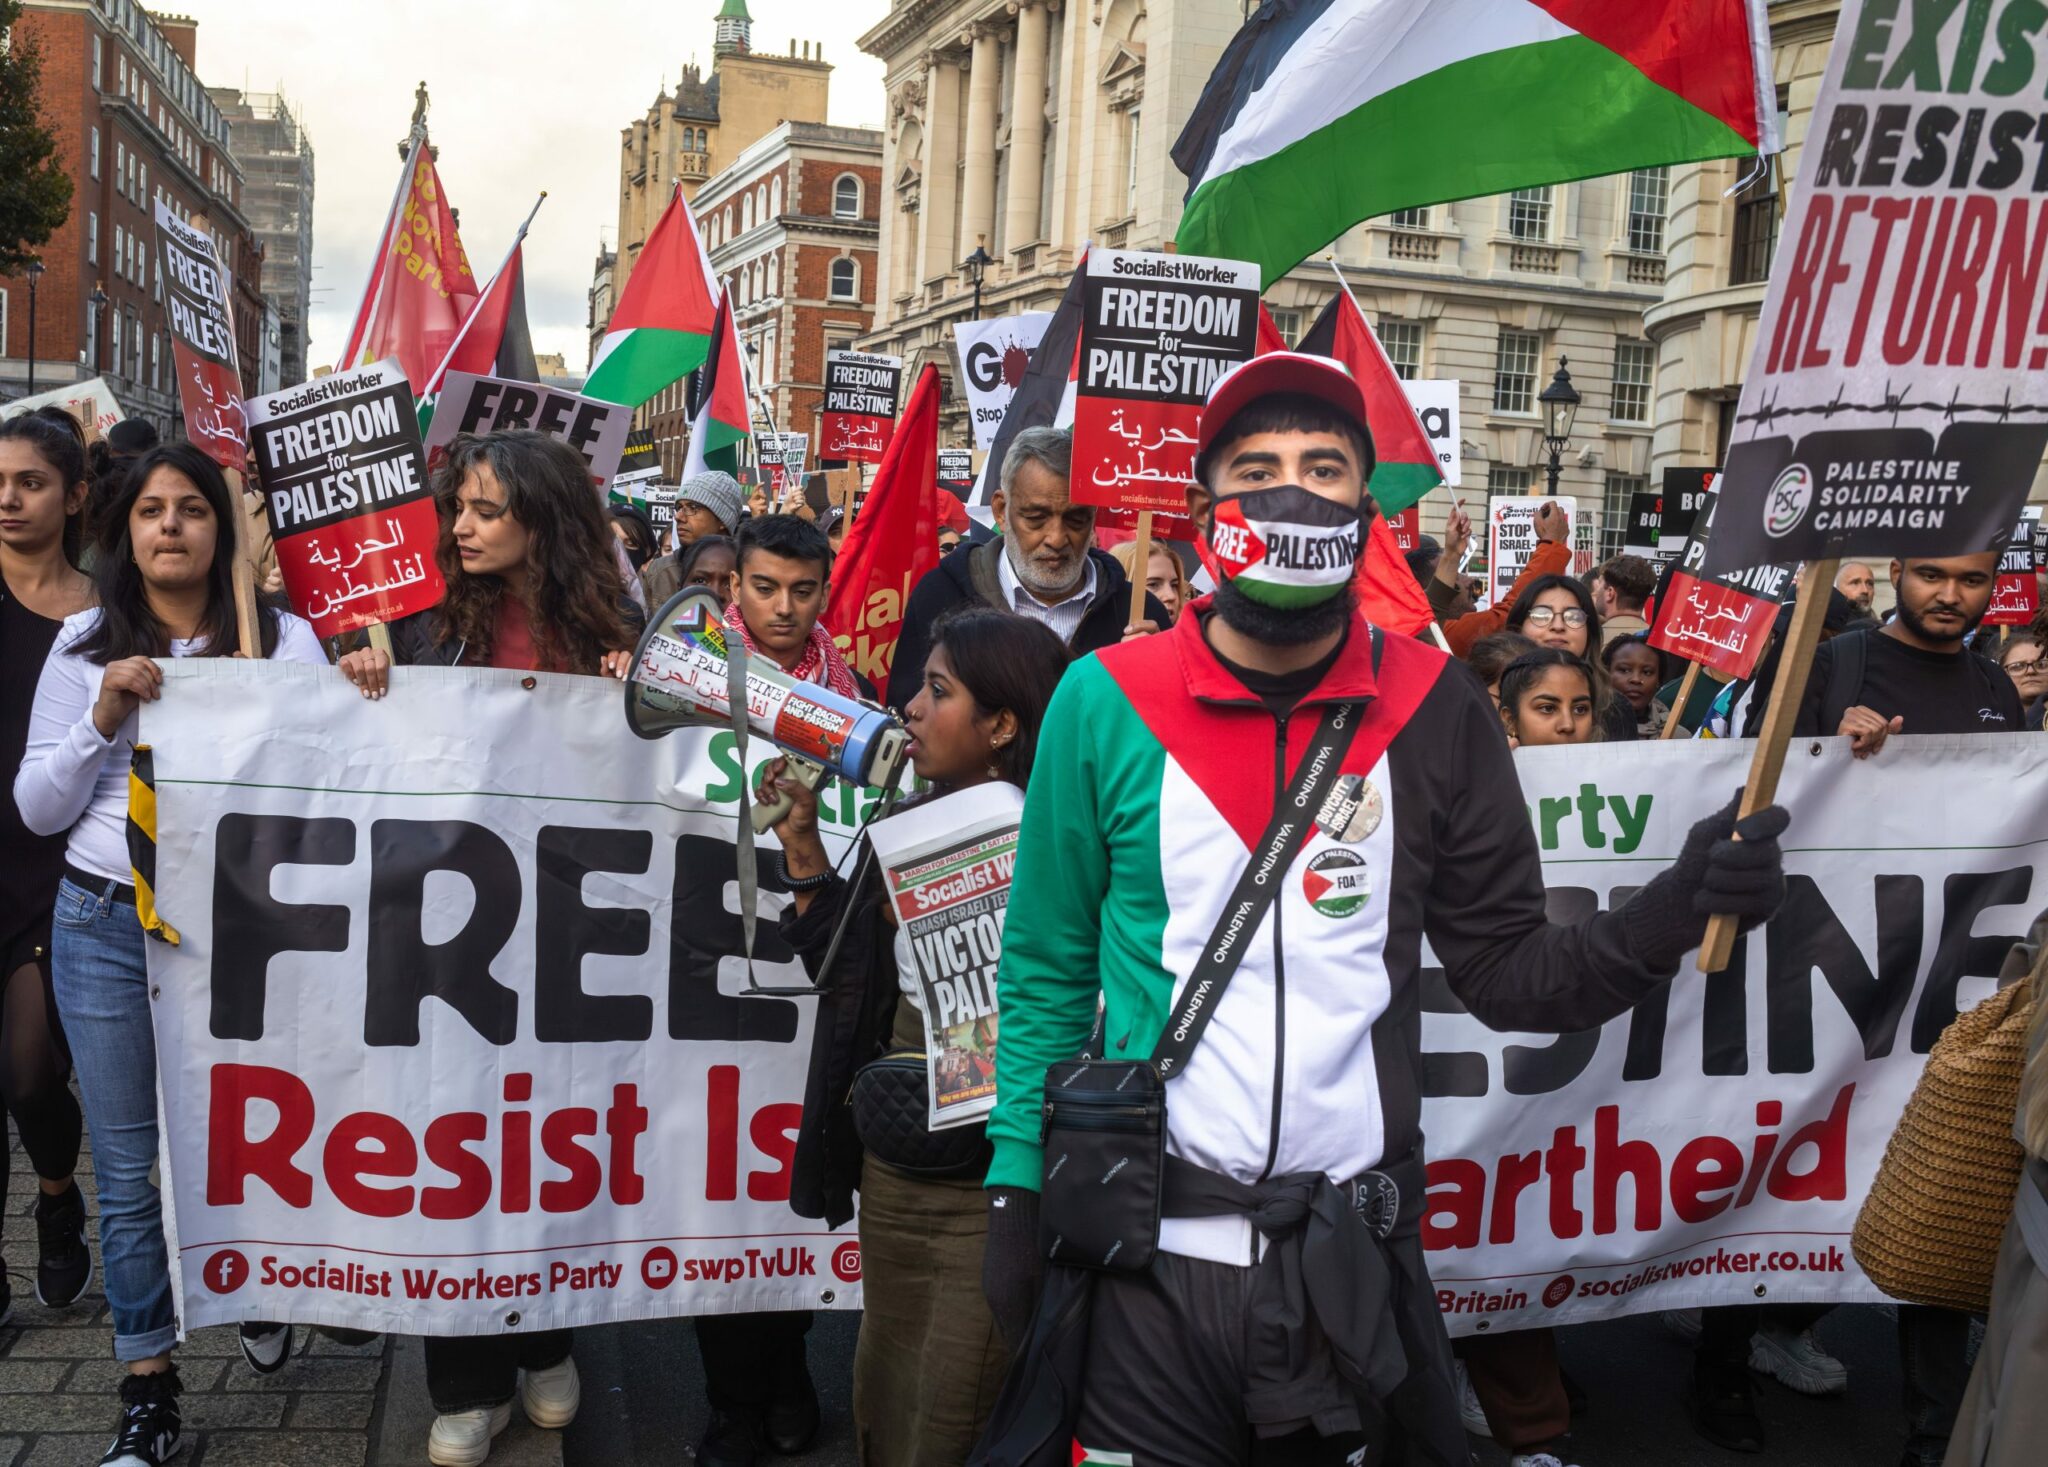 London Demonstrators Rally in Support of Palestine Amid Rising Tensions